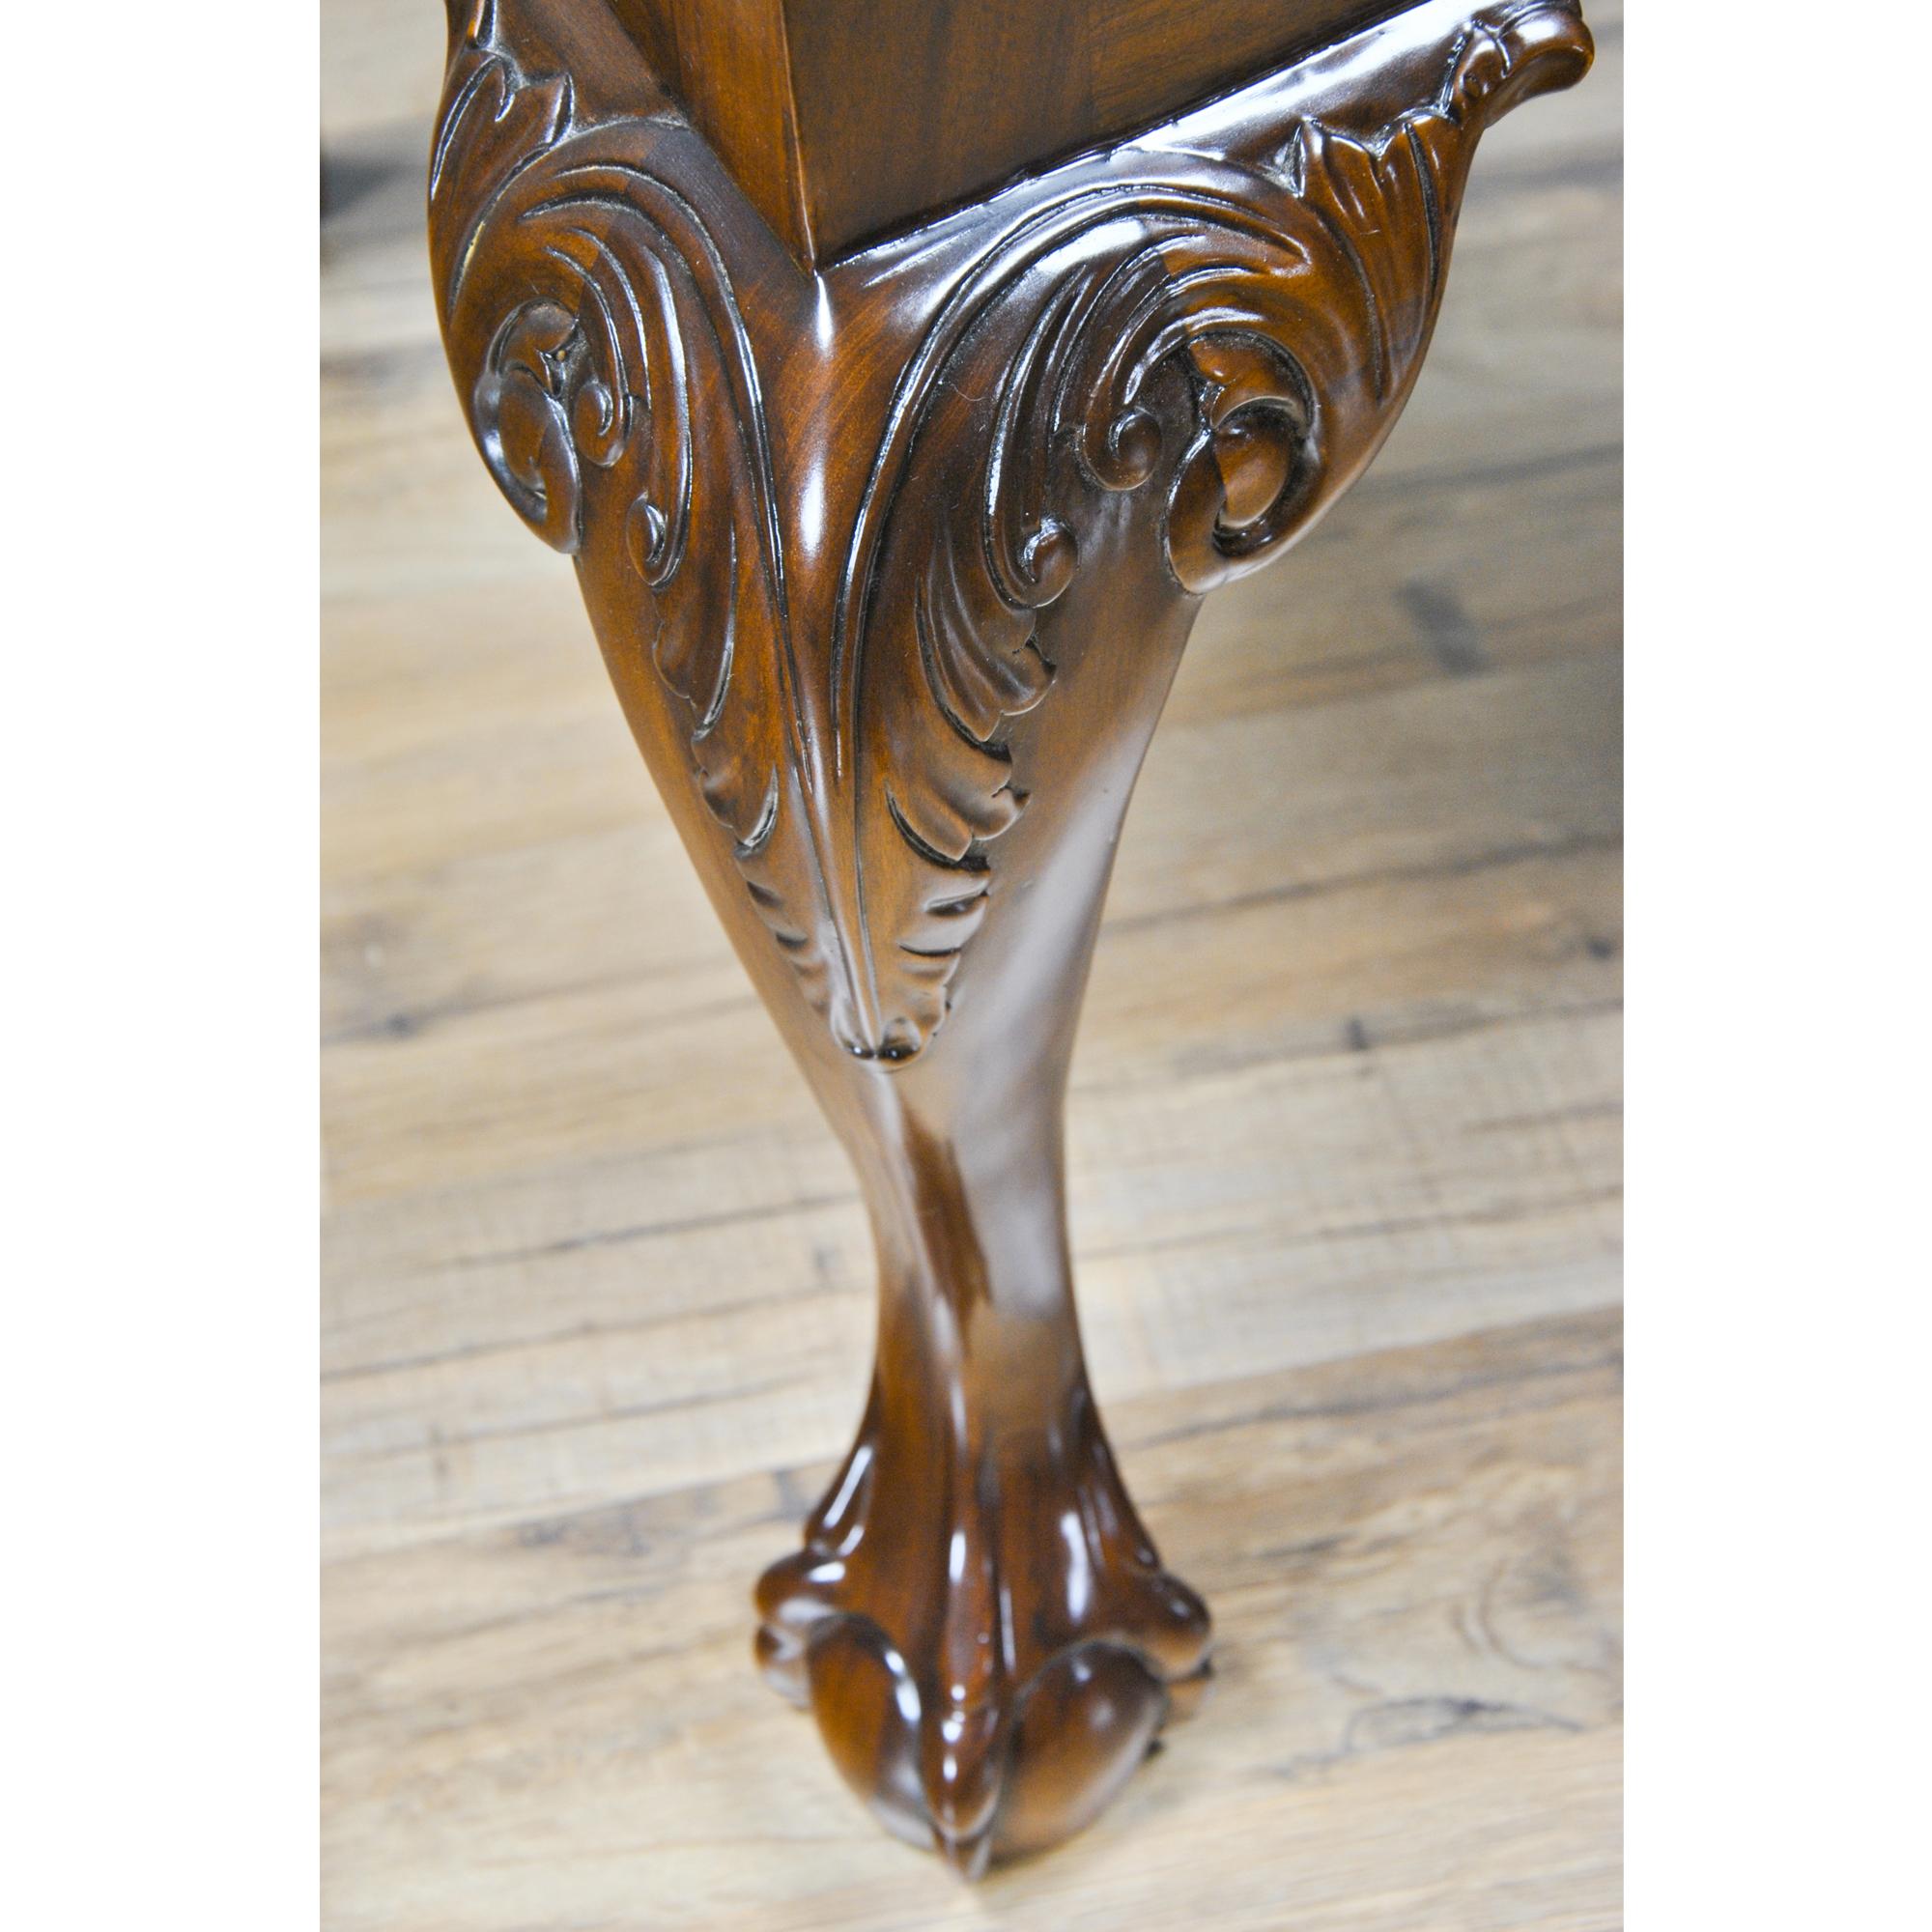 The Fenton Mahogany Chairs features 2 arm chairs and 8 side chairs. The chair backs are fully decorated with carving rendered in solid mahogany while the vertical stiles of the chairs are reeded. The carved crest rail, located across the top of the